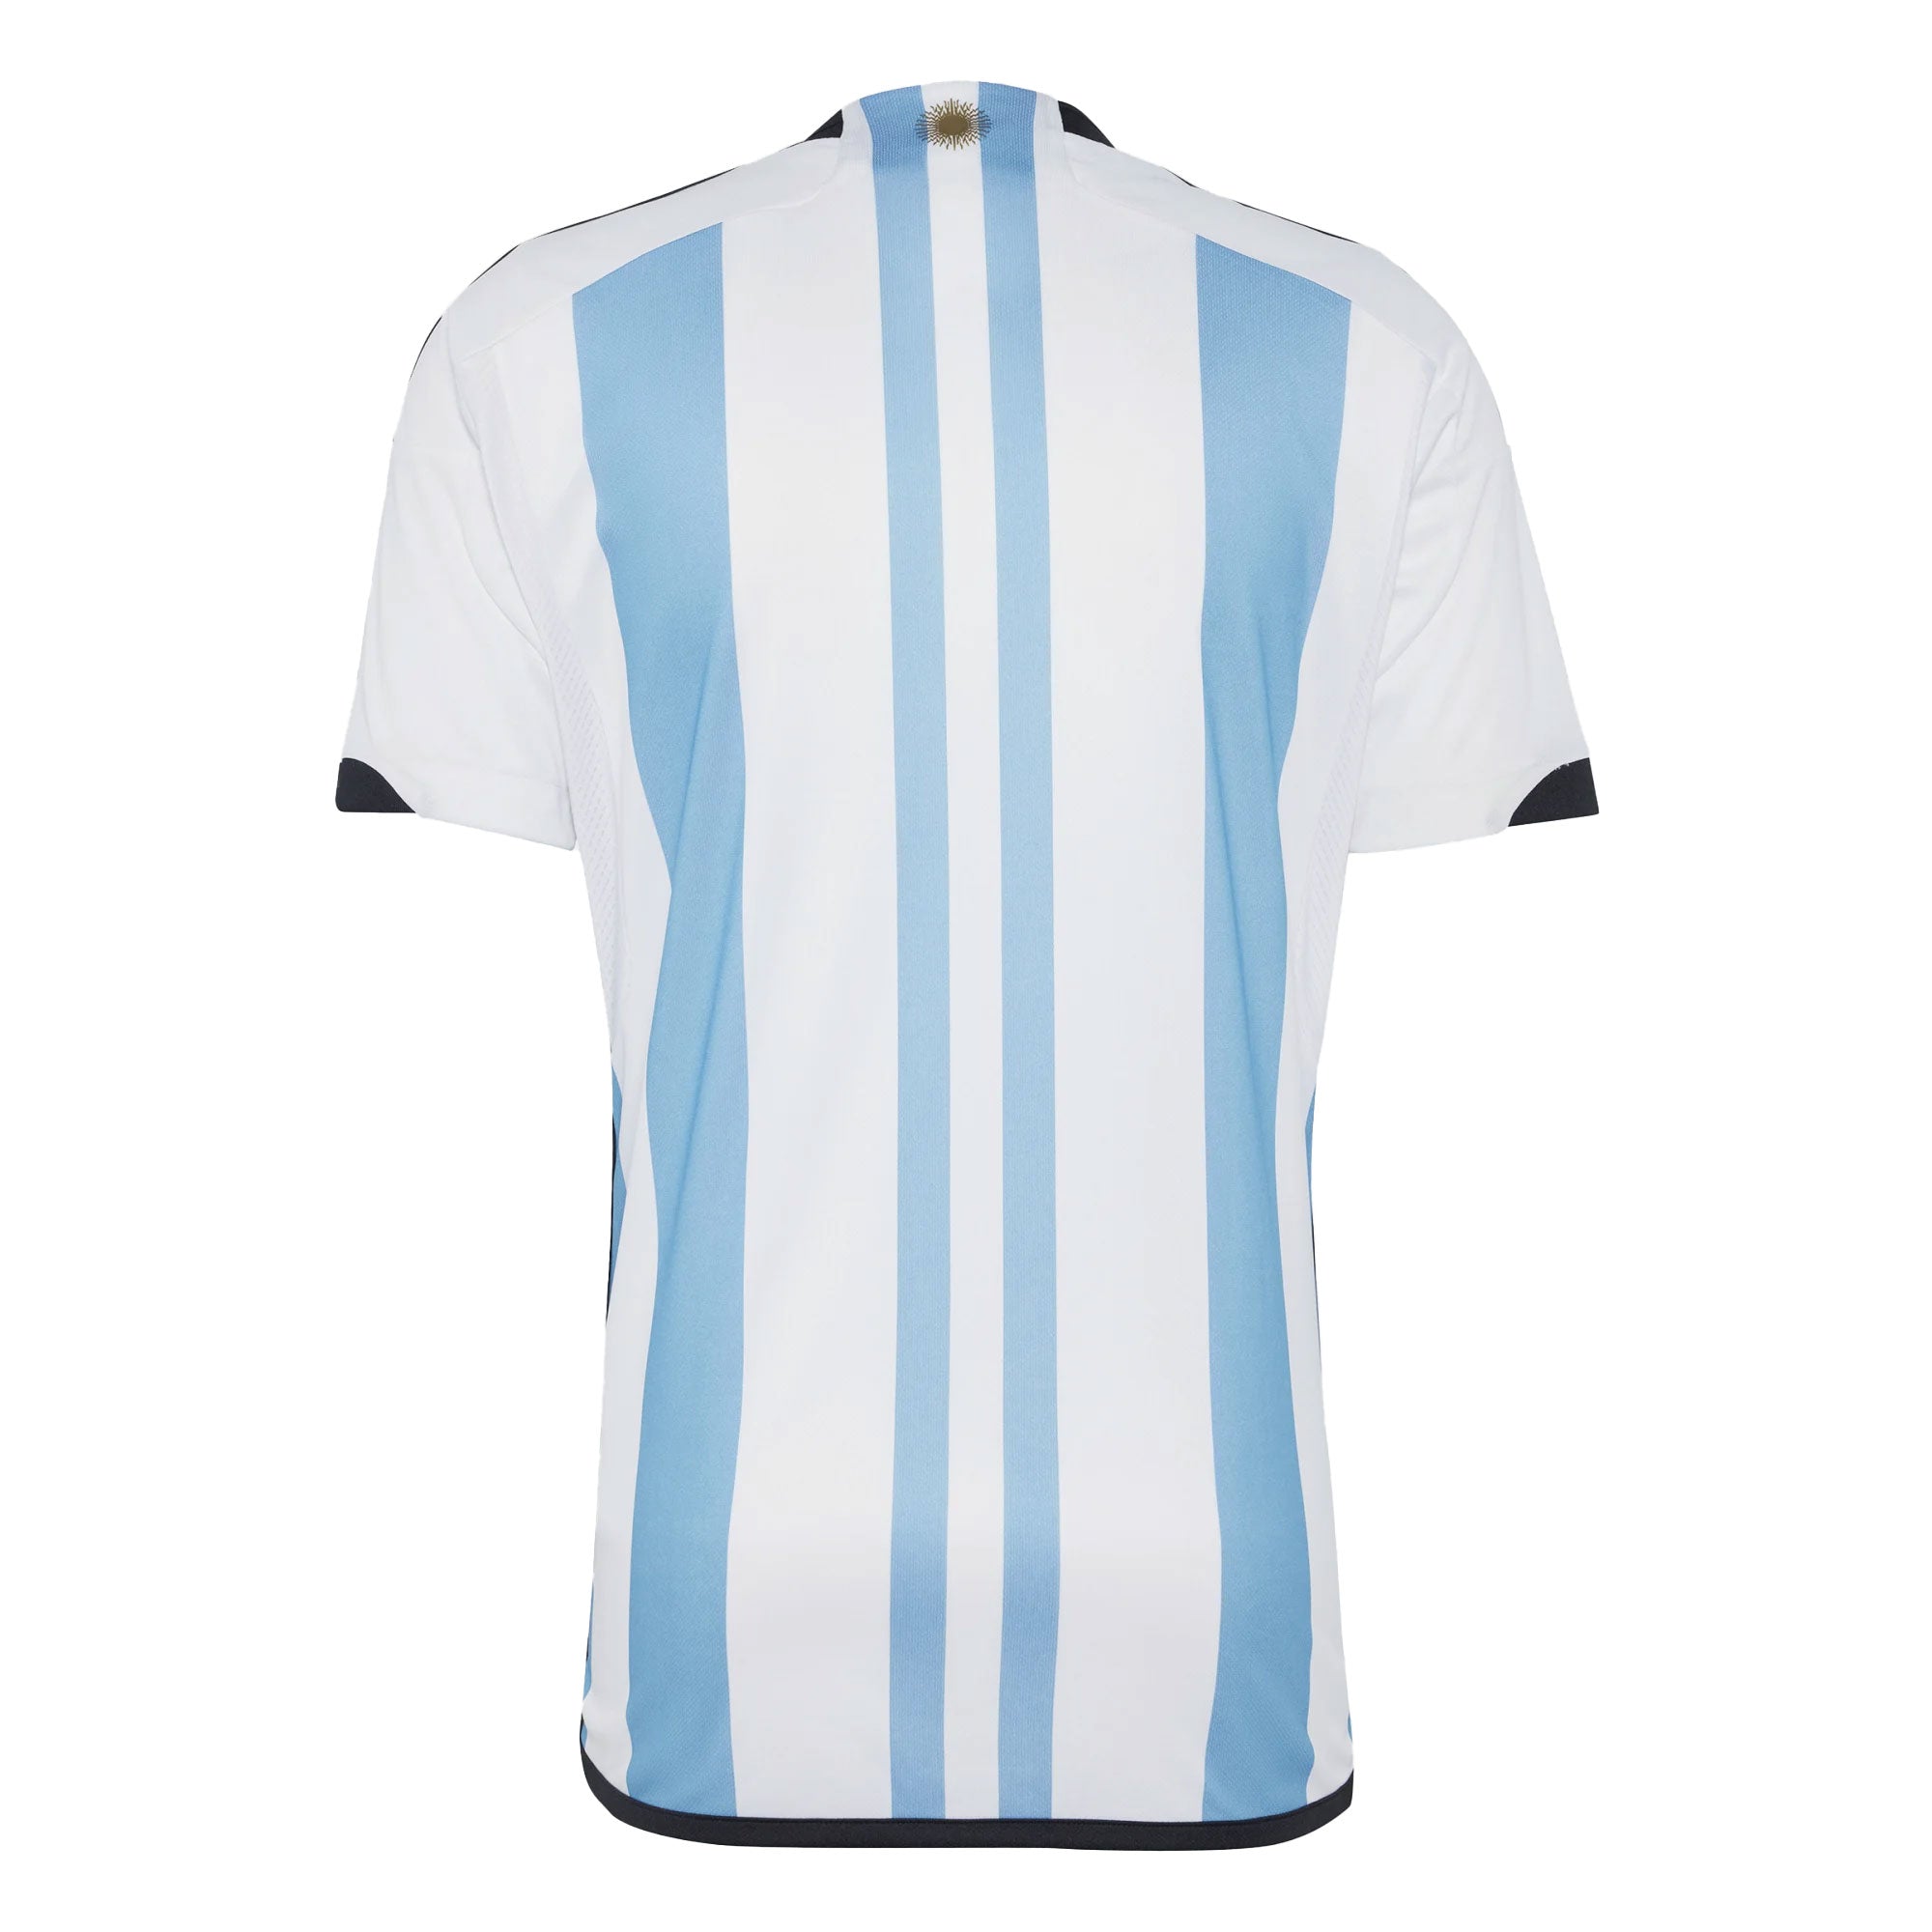 Men's Replica Adidas Argentina 2022 Champions Home Jersey - Size 2XL